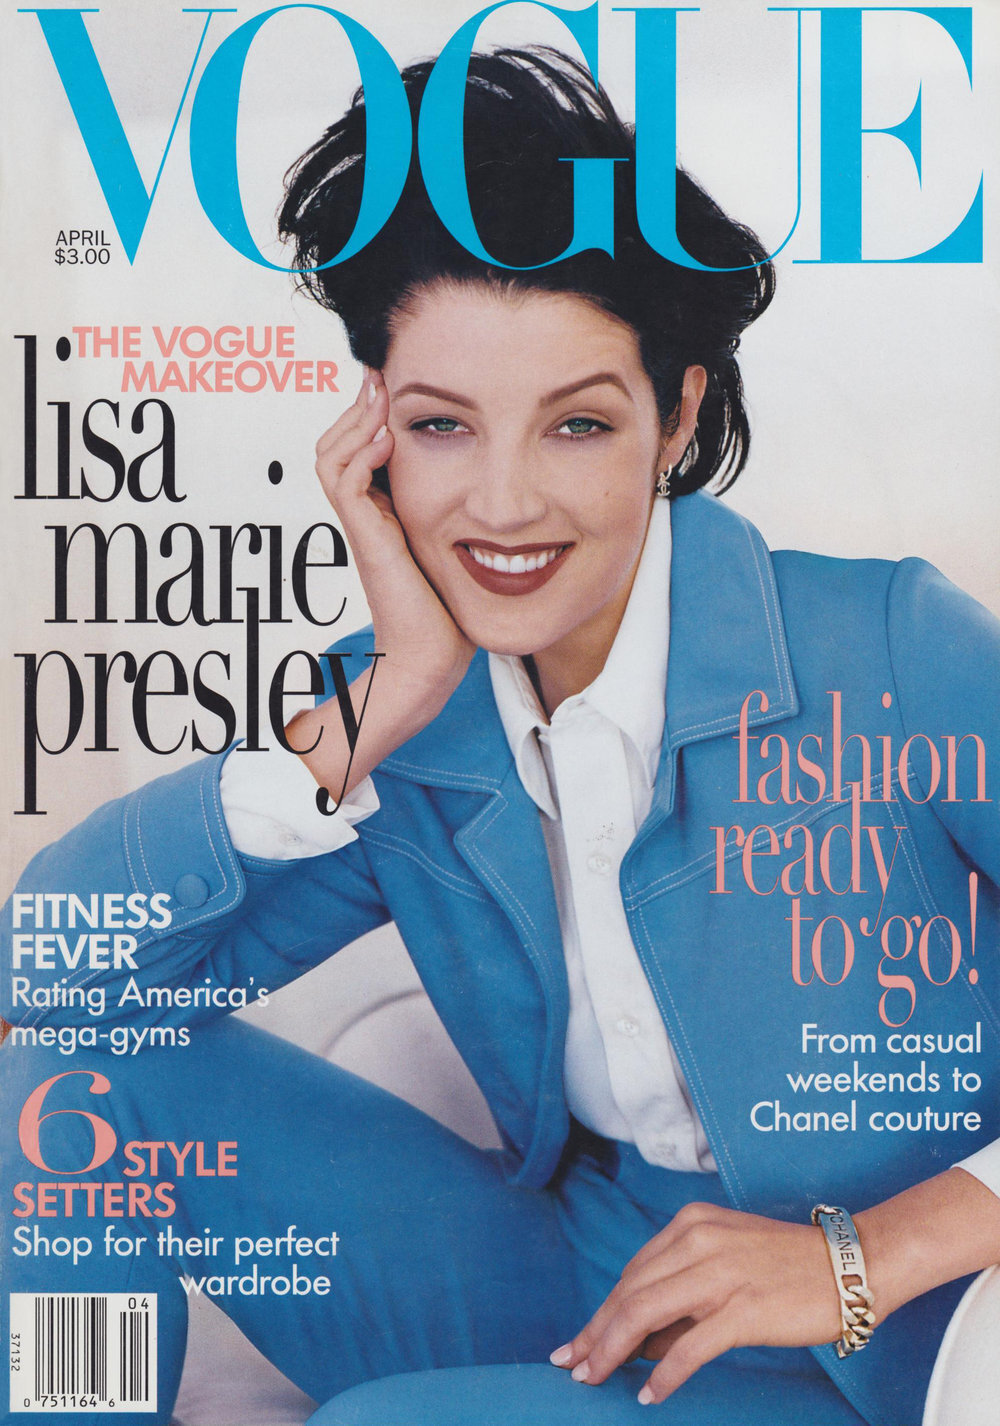 Lisa Marie Presley wearing an Anna Sui suit on the cover of Vogue, April 1996. Photo by Steven Meisel.